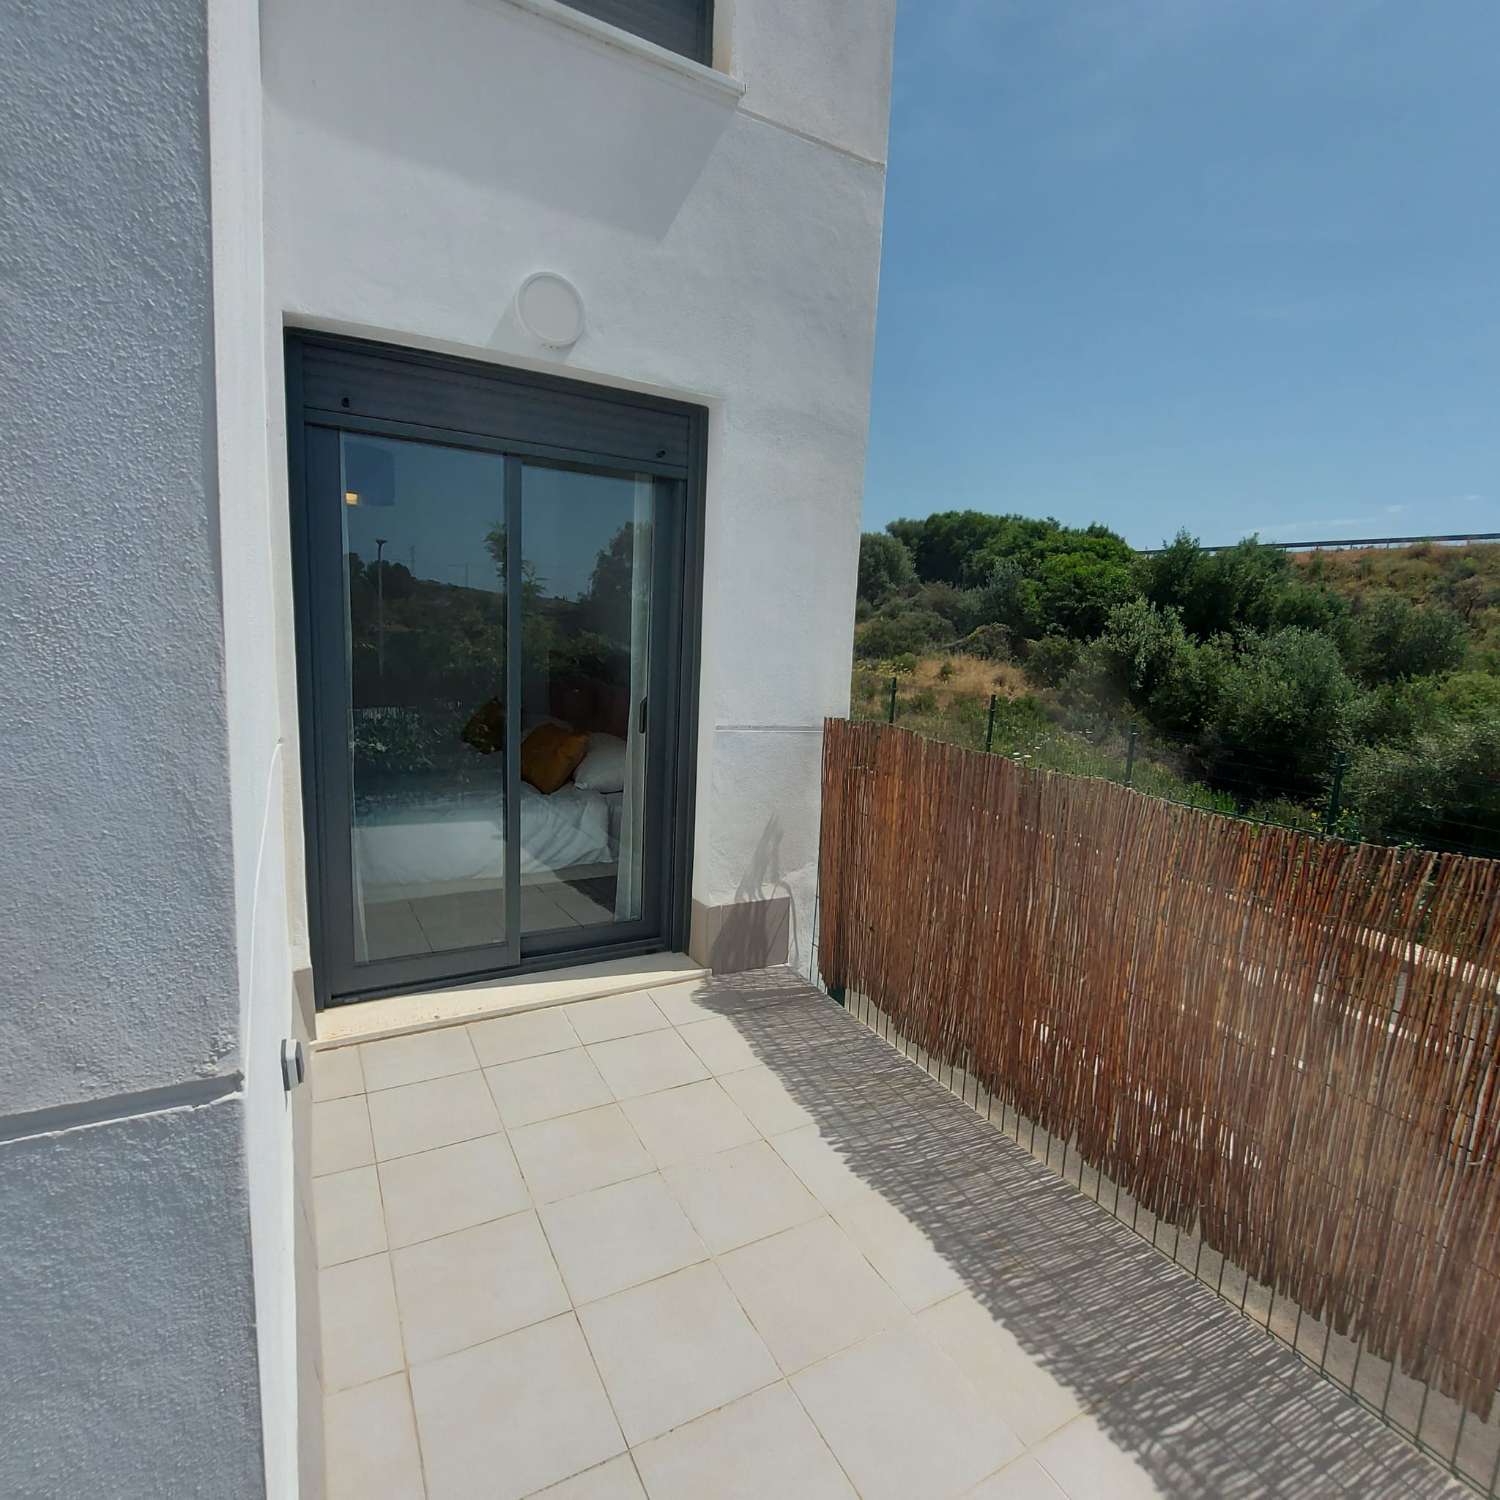 La cala, beautiful ground floor apartment with private terrace and landscaped garden of over 70m.  There are 3 double bedrooms,